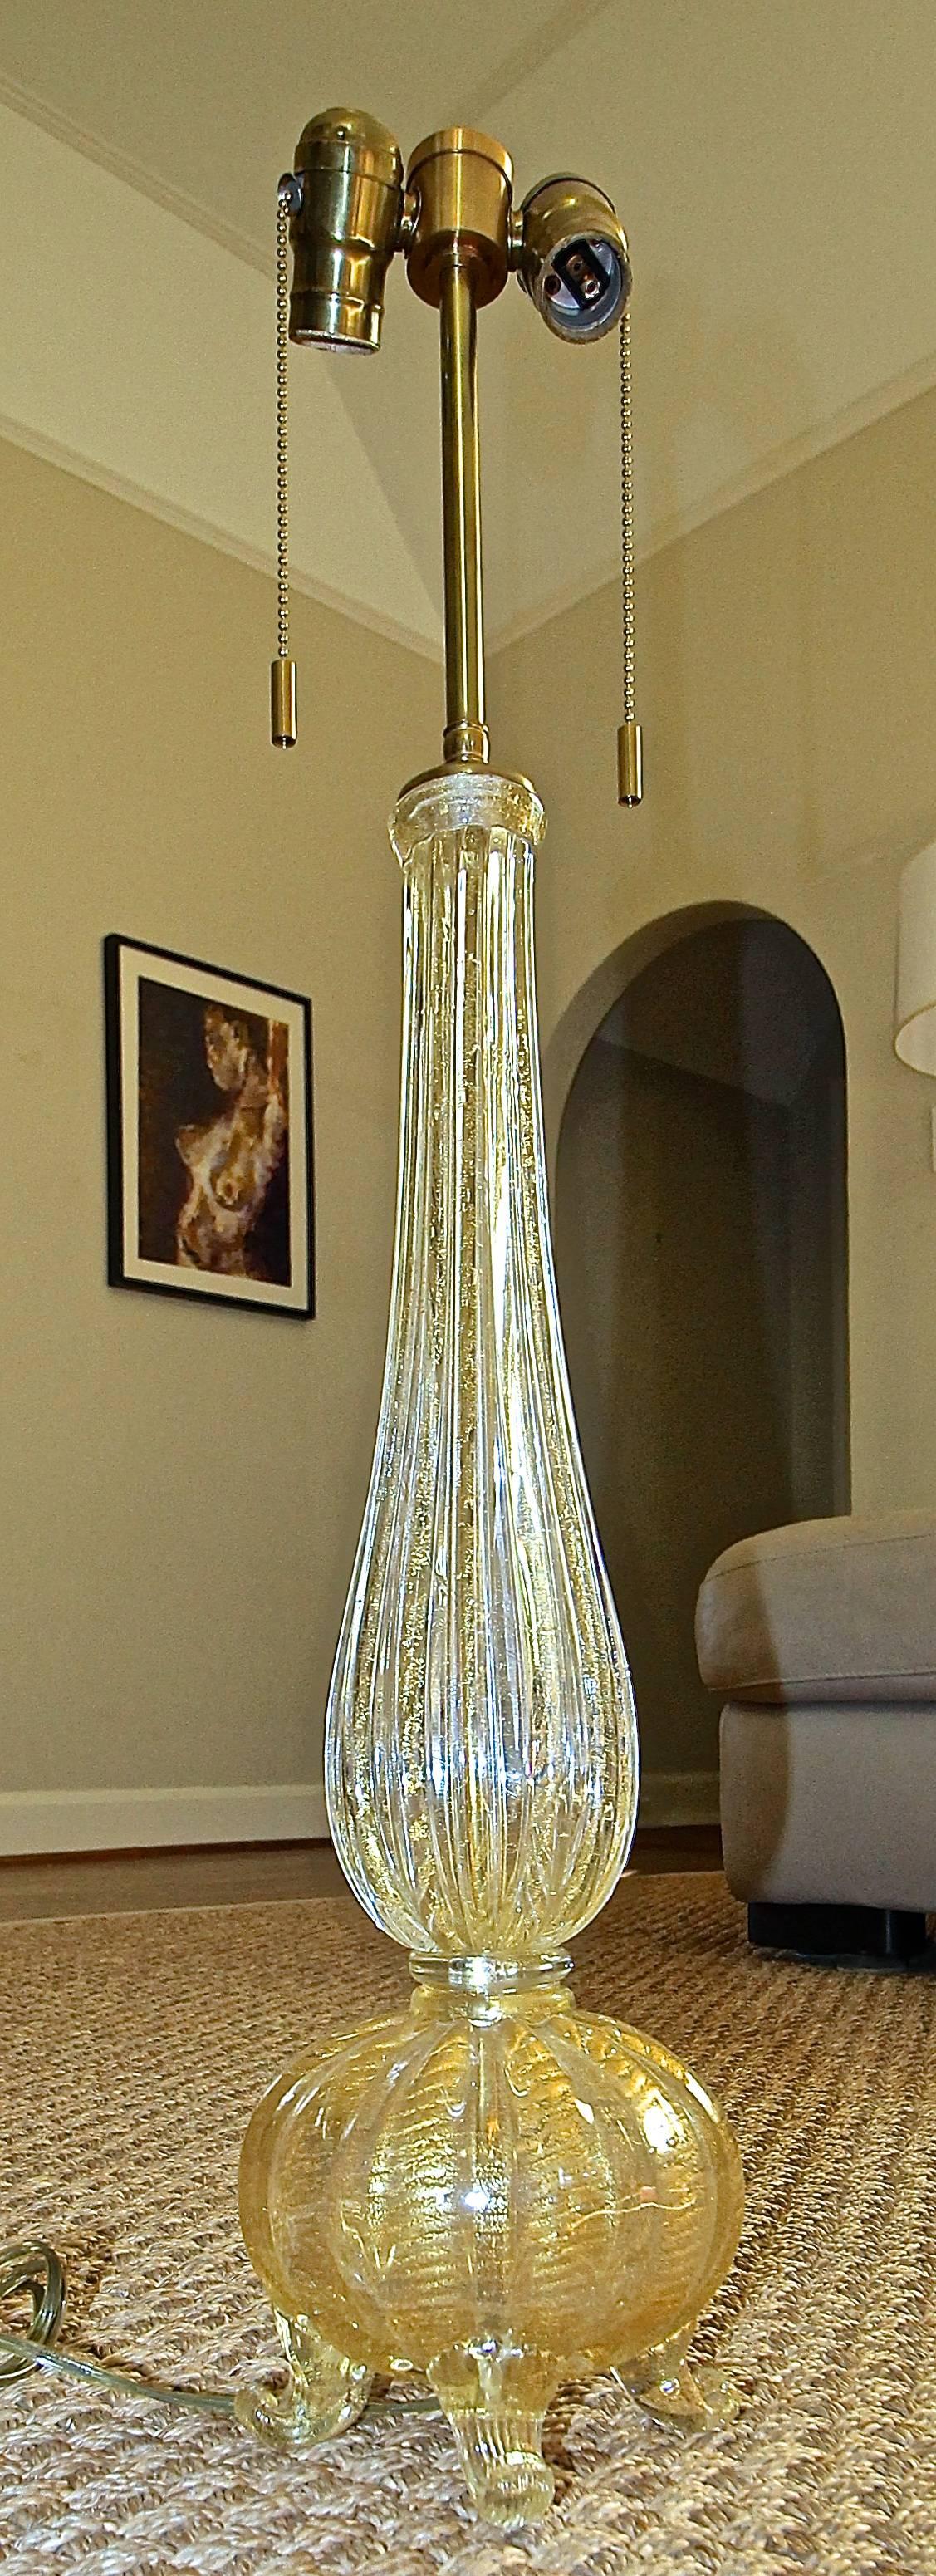 Beautiful Barovier & Toso hand blown footed glass table lamp with gold inclusions in the coranado d'oro technique. New brass fittings and wiring.